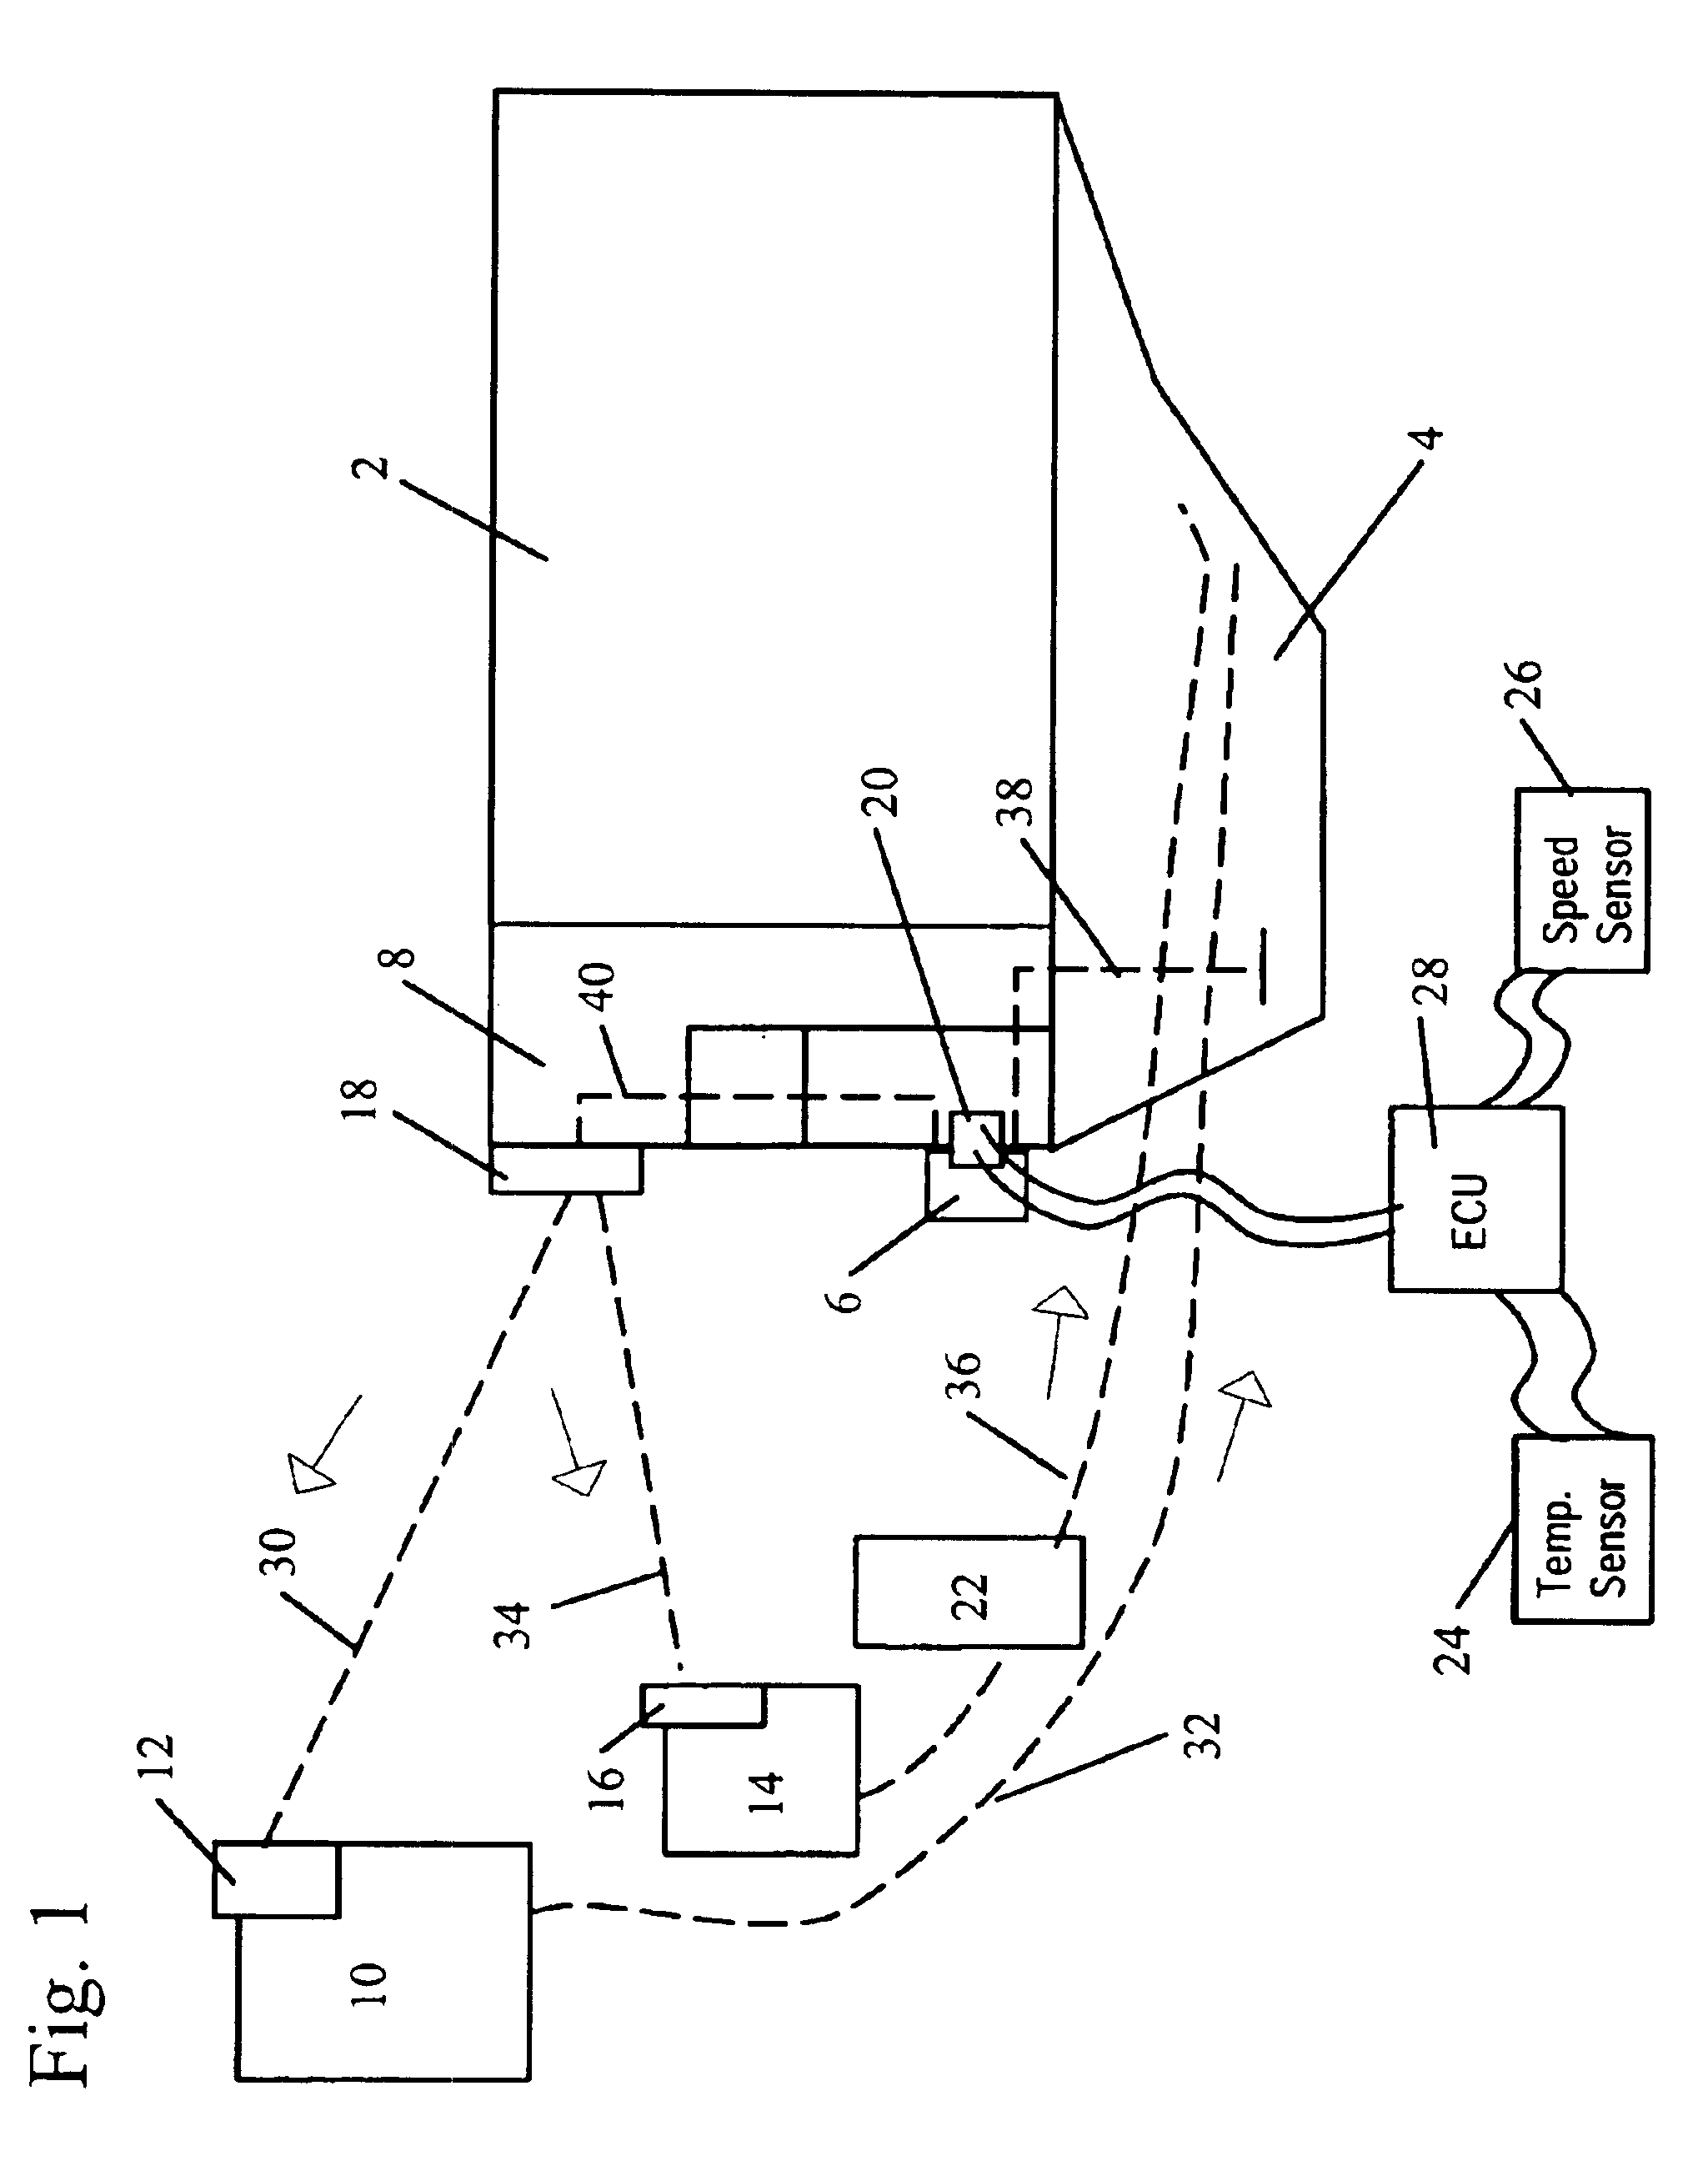 Method of providing hydraulic pressure for mechanical work from an engine lubricating system